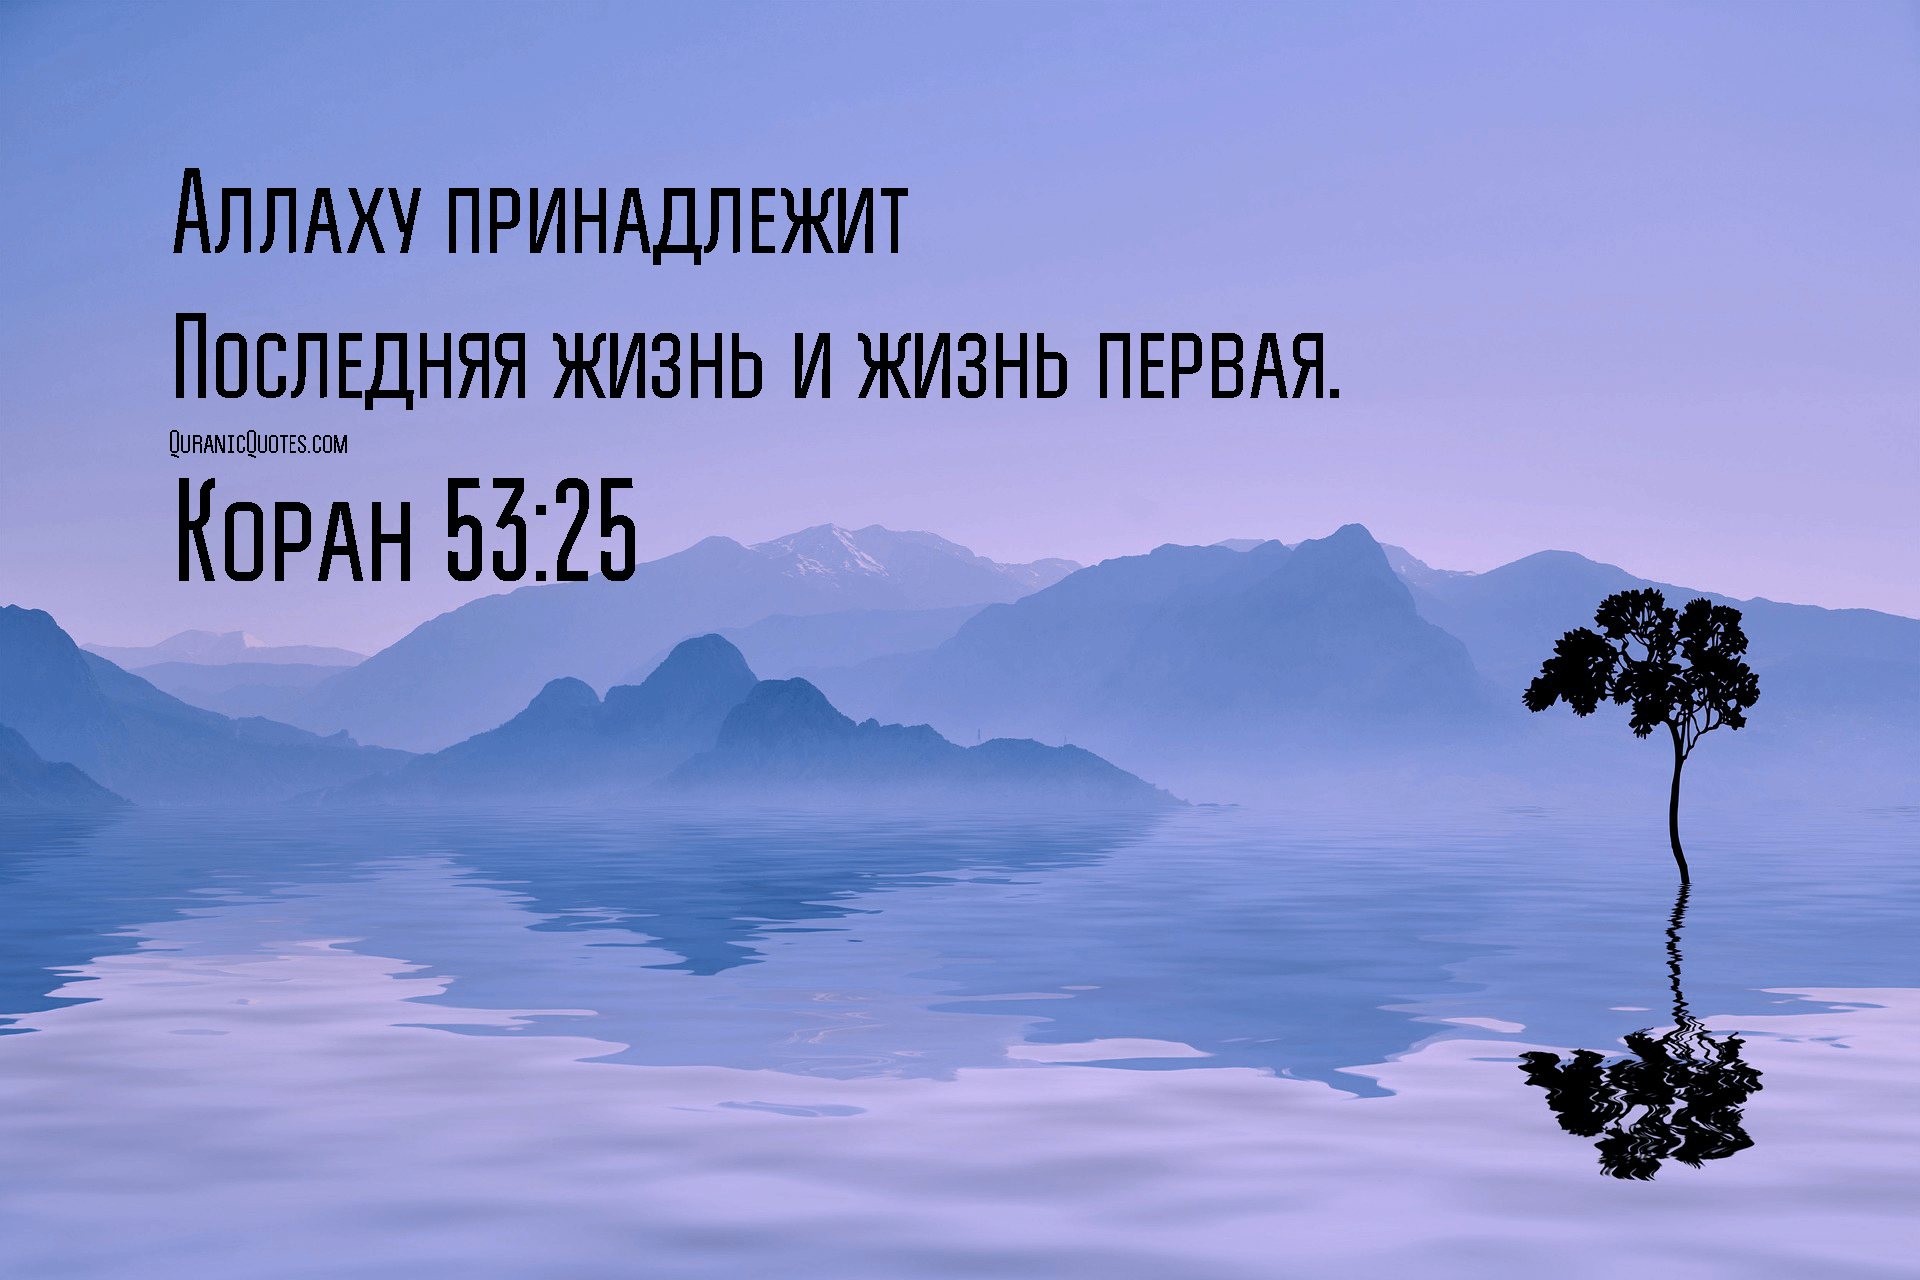 Quranic Quotes in Russian #35